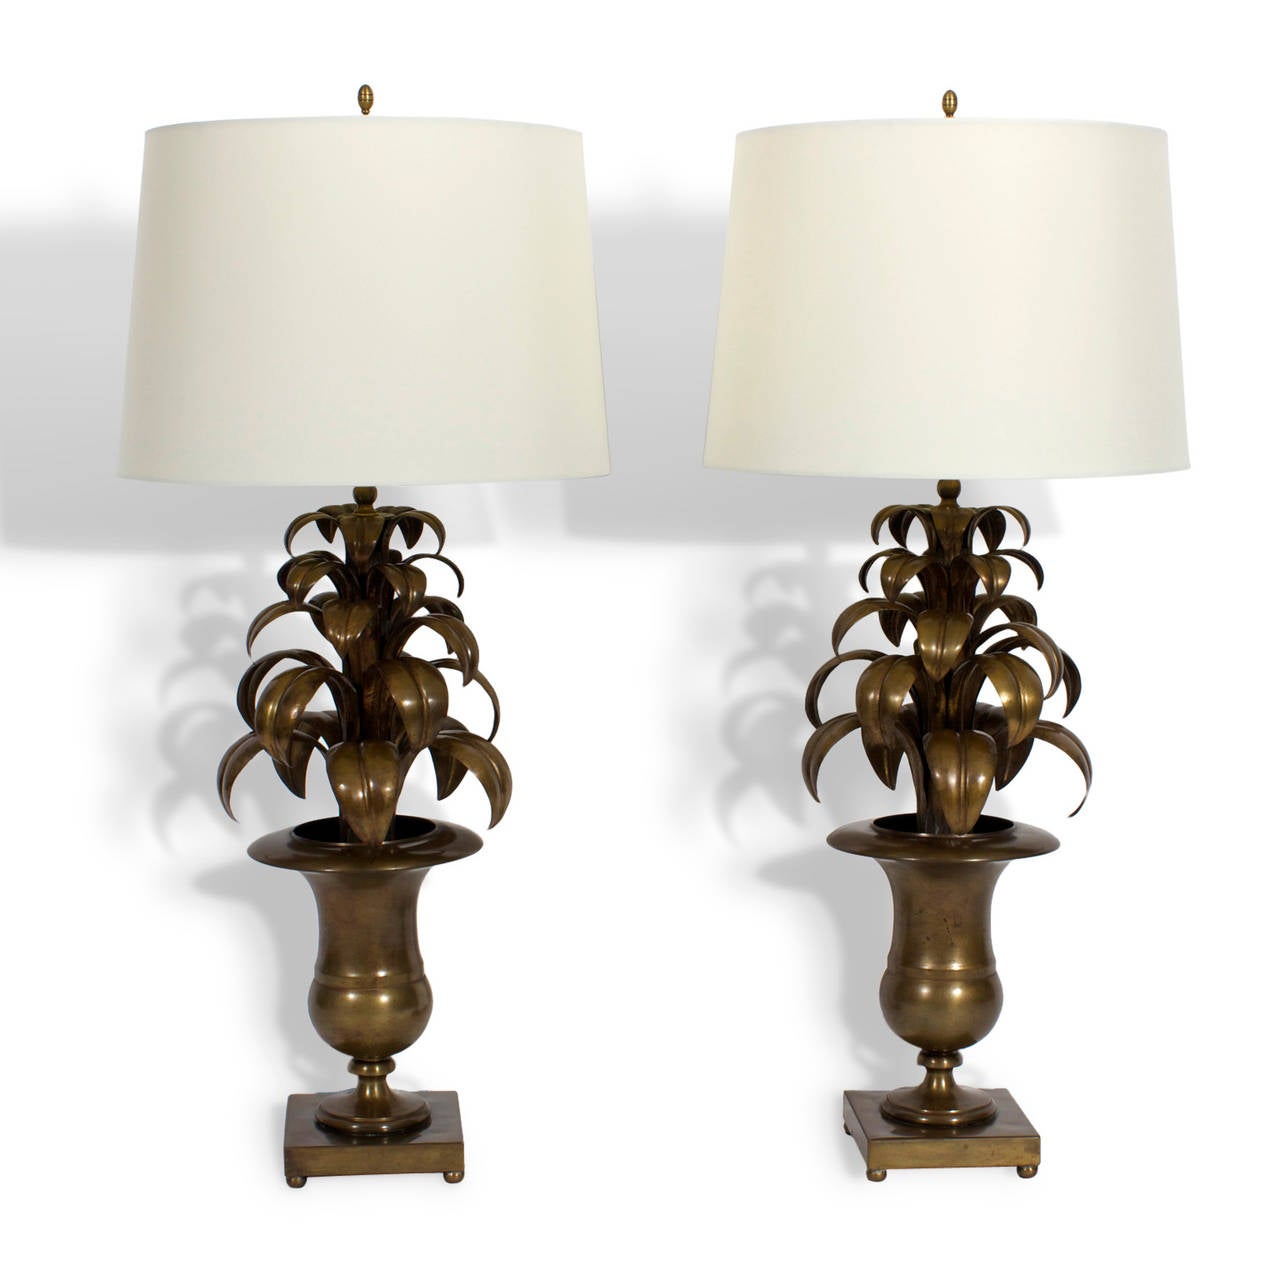 A pair of all brass Italian table lamps with layers of graceful leaves in campana shaped urns on square plinths with ball feet. Chic, modern with a warm patina. Never need water. Newly wired.

.